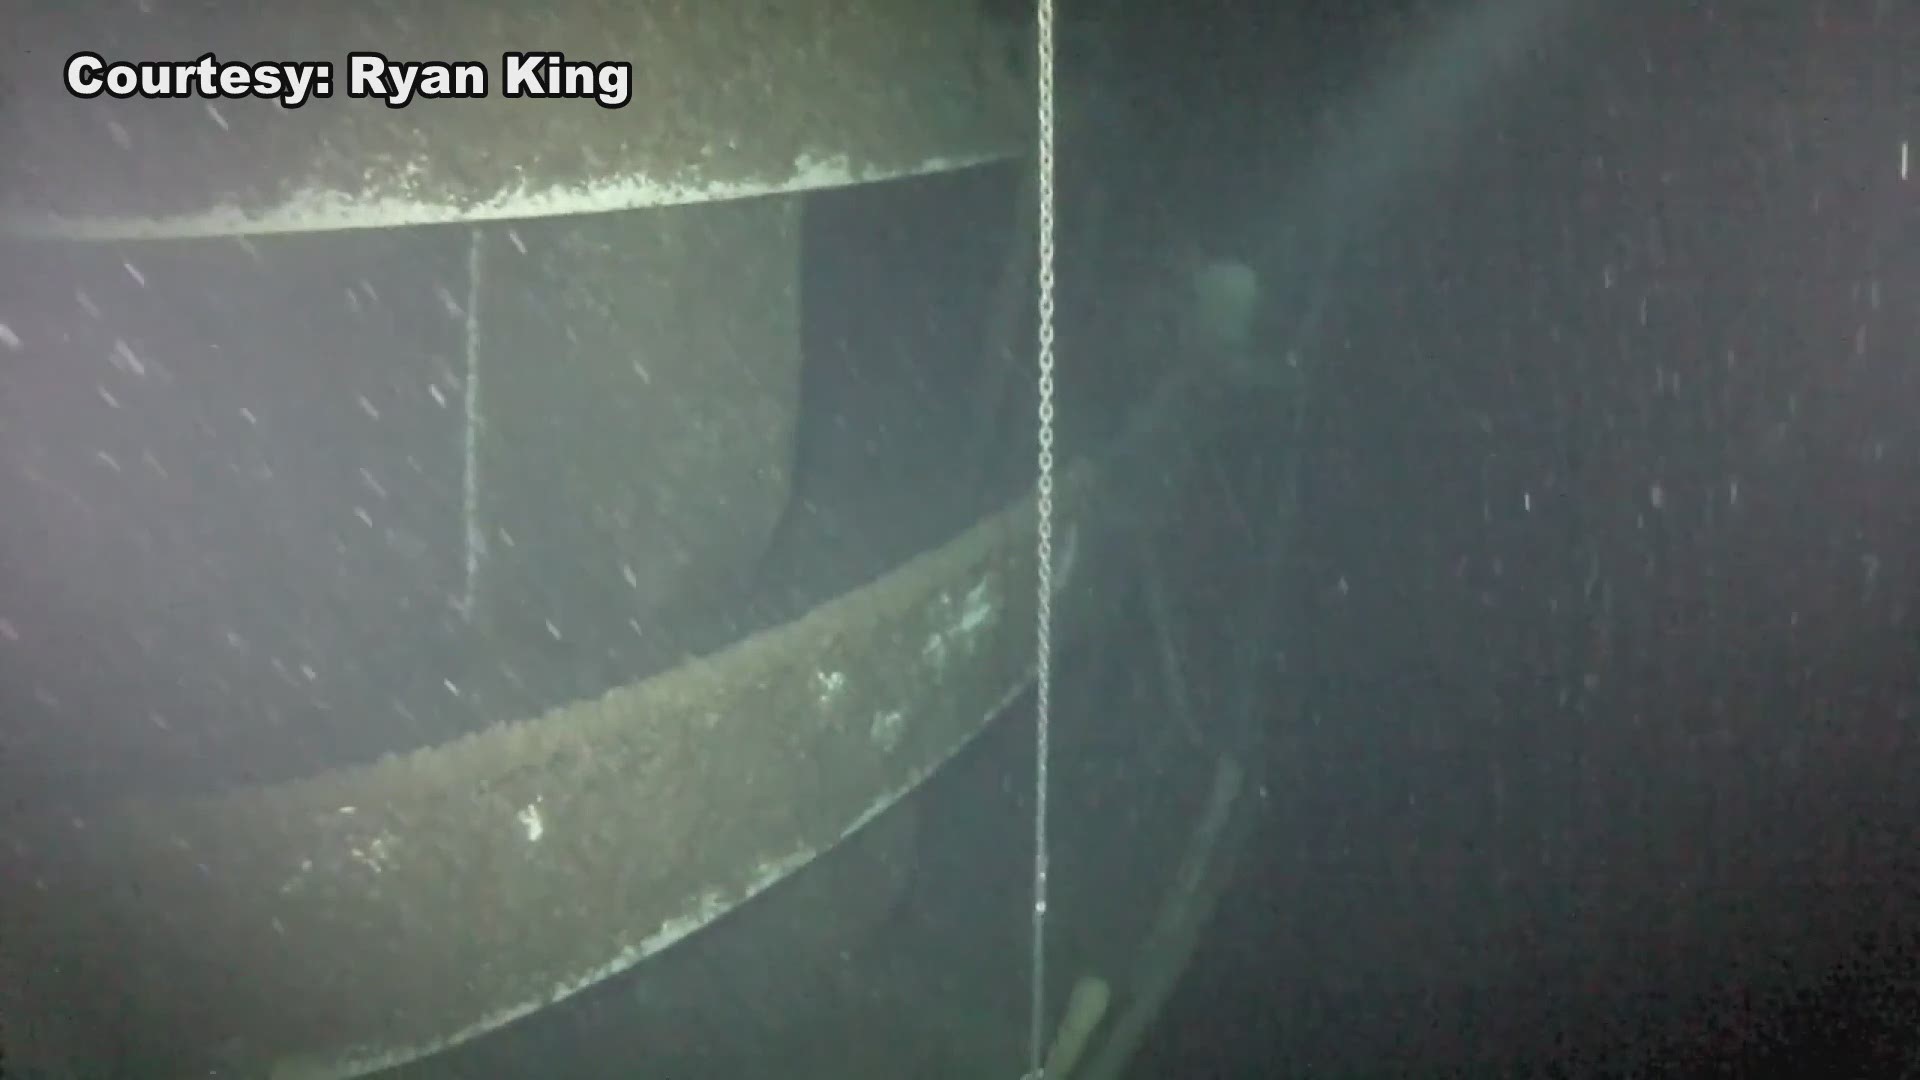 Ryan King dived the Carl D. Bradley in both 2013 and 2015 and captured some amazing HD raw footage of the sunken ship.